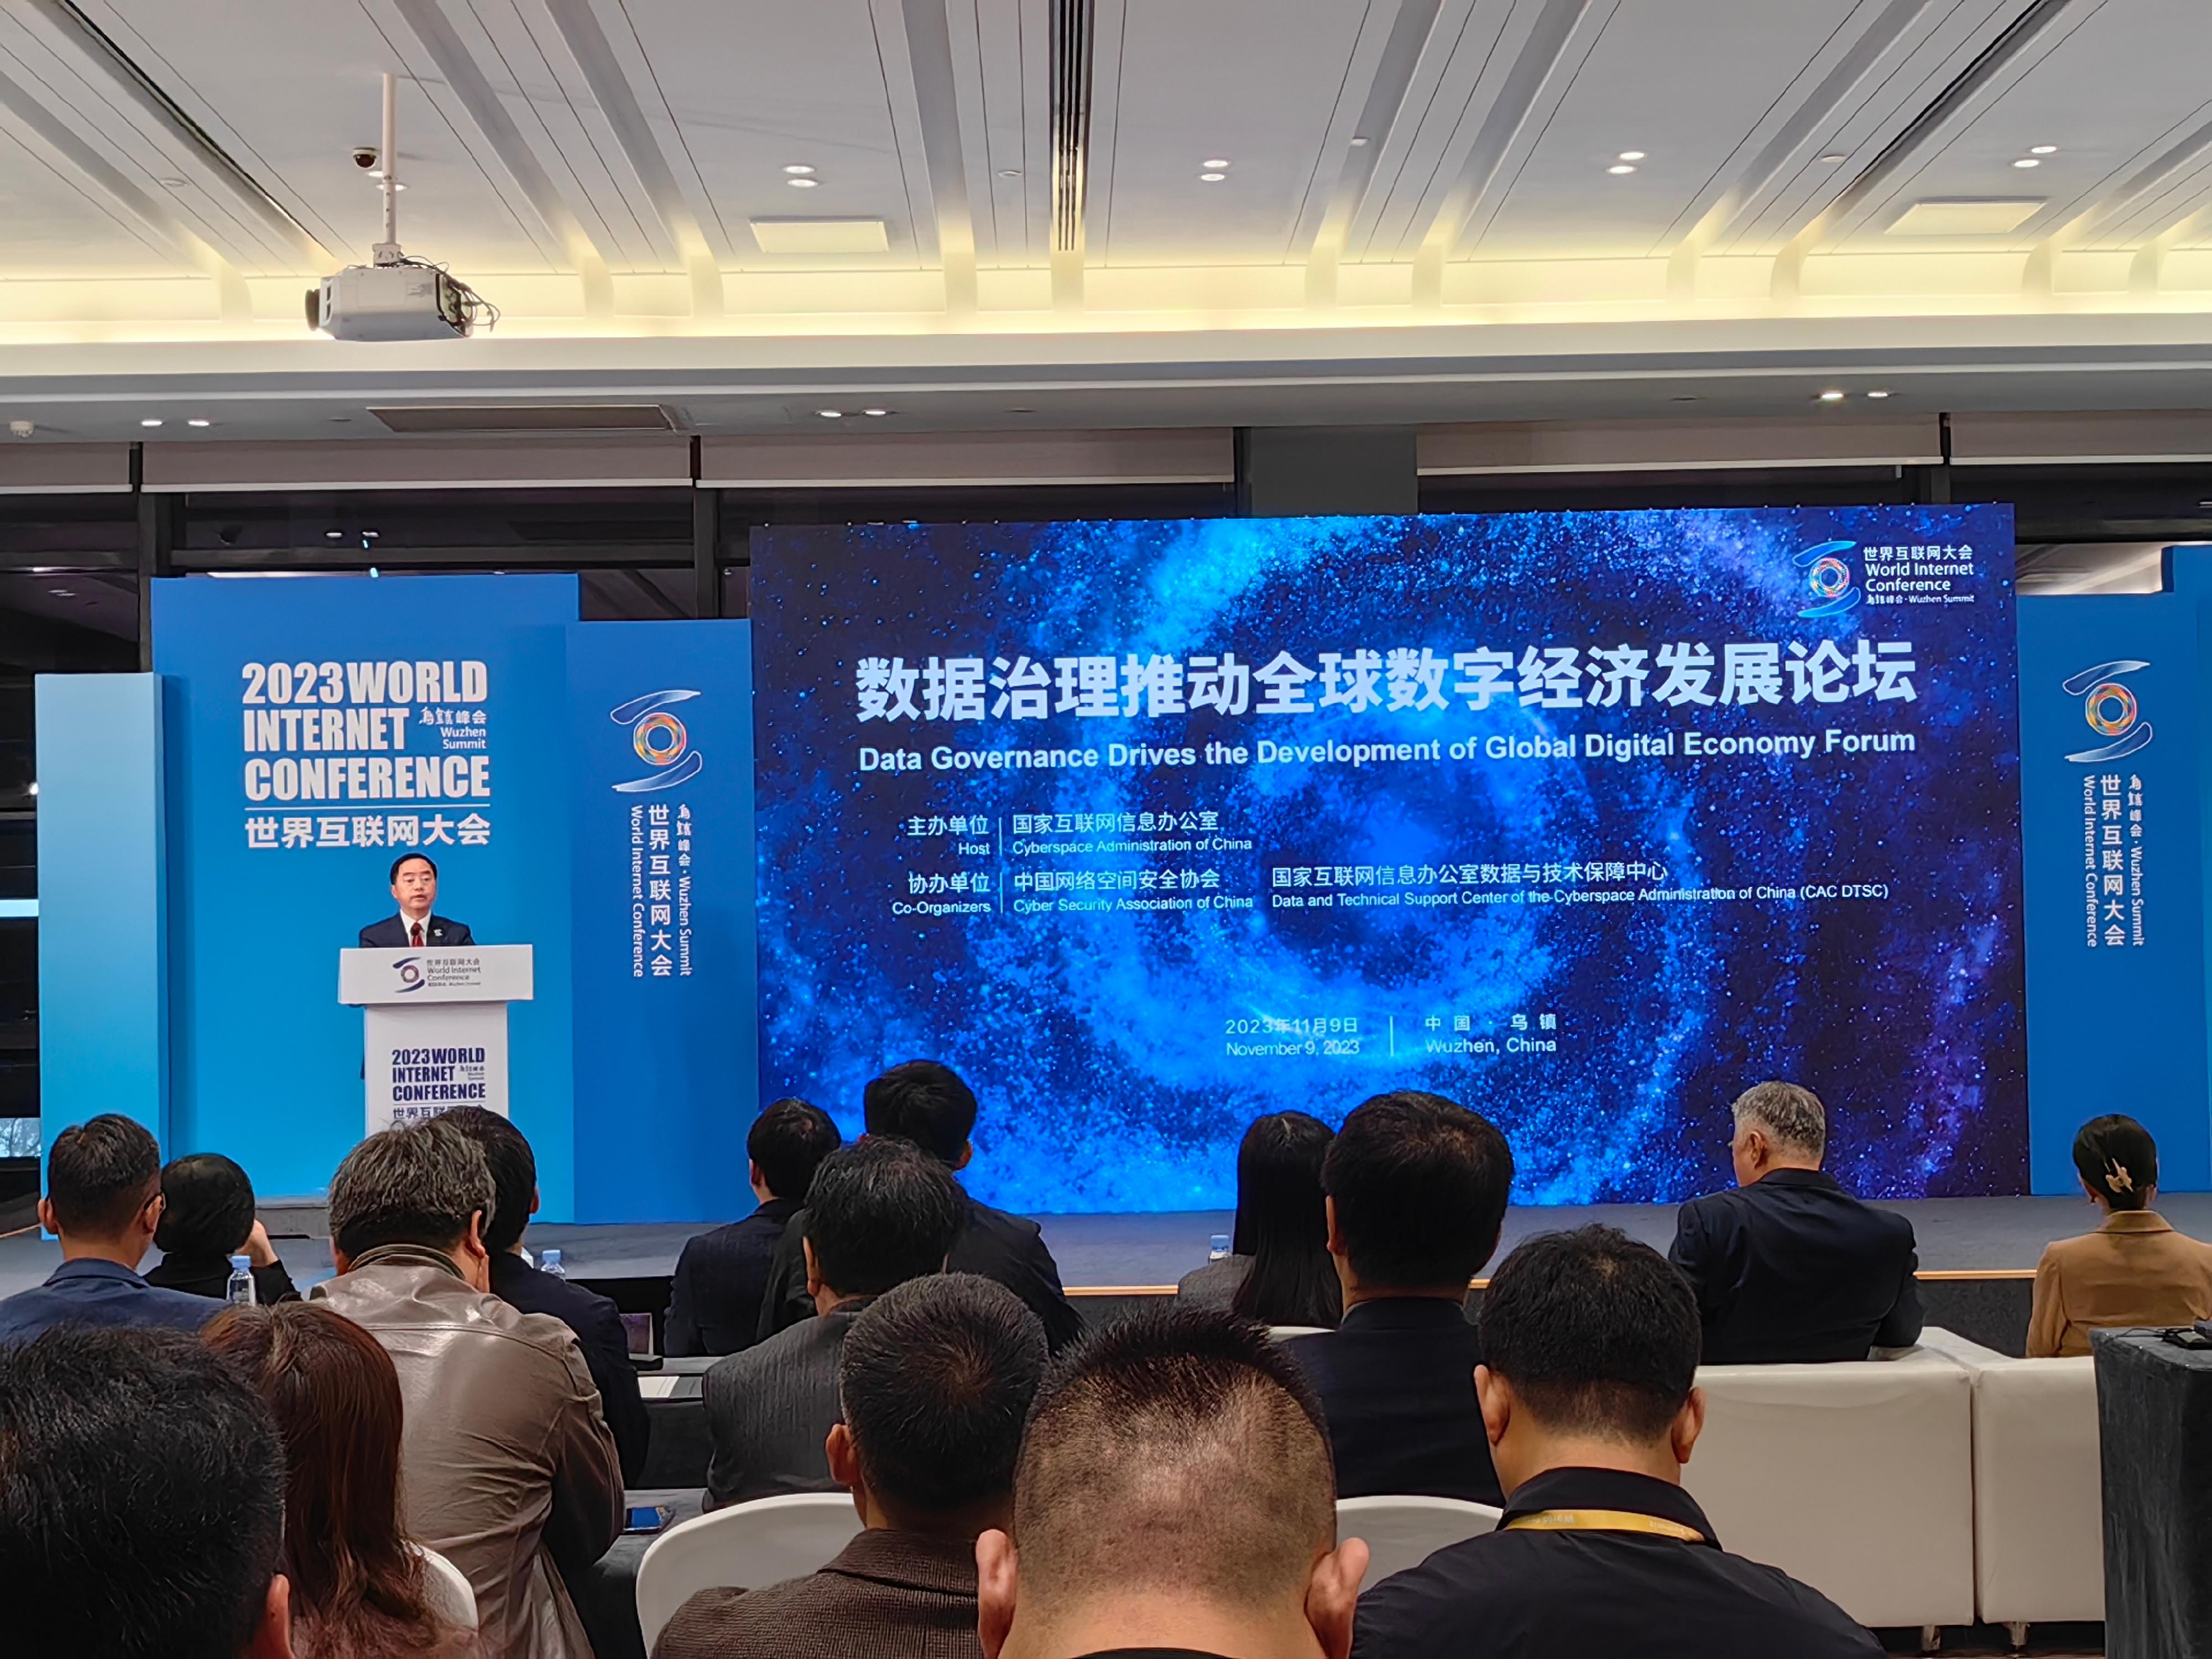 The Government Chief Information Officer, Mr Tony Wong, speaks at the Data Governance Drives the Development of Global Digital Economy Forum of the 2023 World Internet Conference Wuzhen Summit in Zhejiang today (November 9).